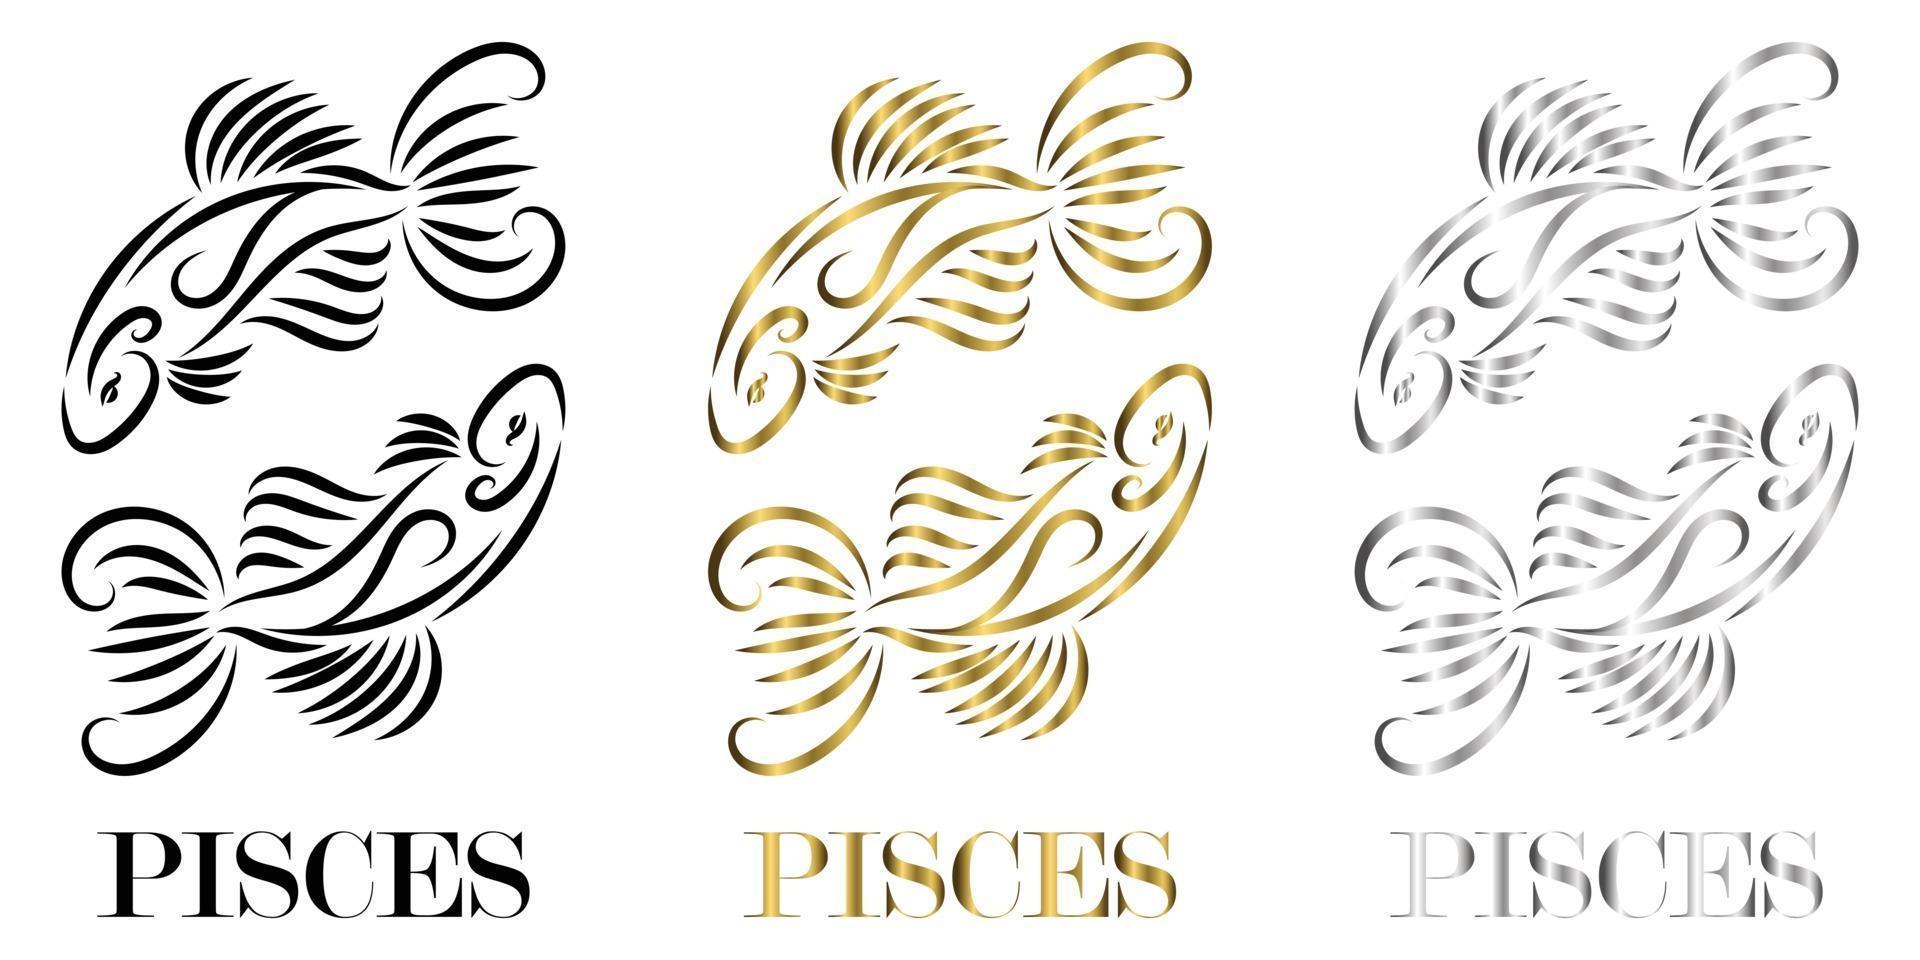 line vector logo of two fish It is sign of pisces zodiac there are three color black gold silver